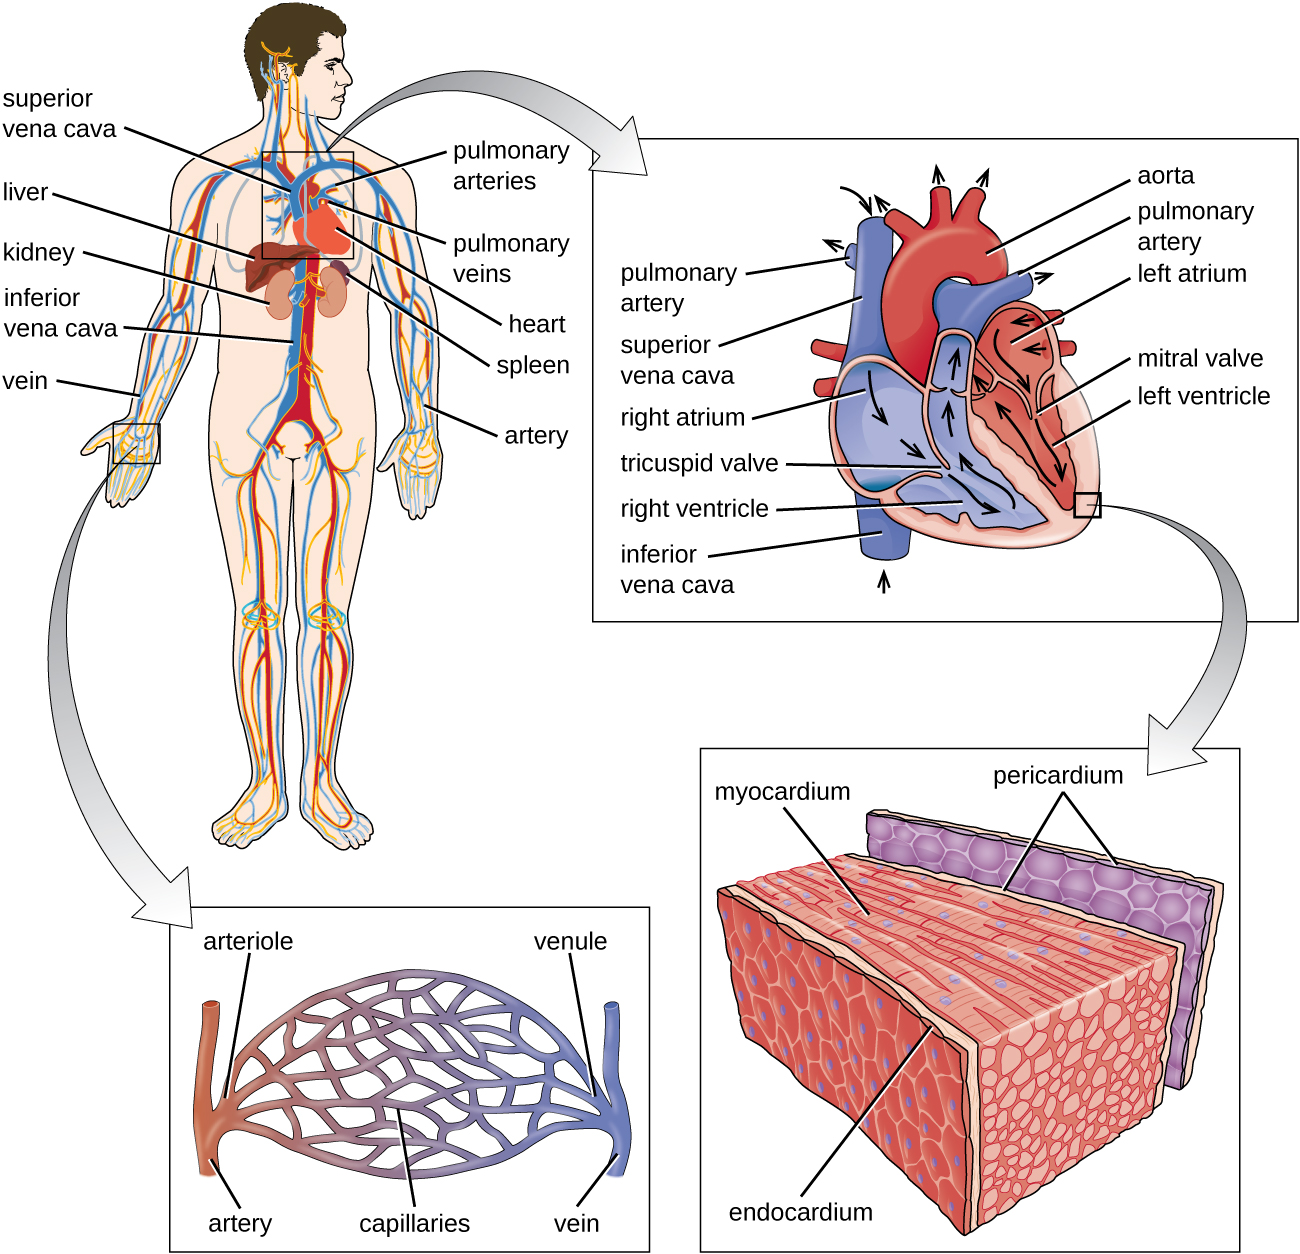 a) Diagram of the circulatory system. Blood from the lower part of the body travels to the heart in the inferior vena cava. Blood from the upper part of the body travels to the heart in the superior vena cava. The pulmonary artery travels from the heart to the lungs and the pulmonary vein travels from the lungs to the heart. B) A diagram of the heart showing the flow of blood. Beginning in the superior and inferior vena cavas, blood travels to the right atrium, through the tricuspid valve, to the right ventricle and out the pulmonary artery. The image does not follow the pulmonary artery. From the pulmonary vein blood travels to the left atrium, through the mitral valve, to the left ventricle and out the aorta.  C) The layers of the heart. The Pericardium is the outer layer. The myocardium is the thick middle layer. The endocardium is the inner layer.